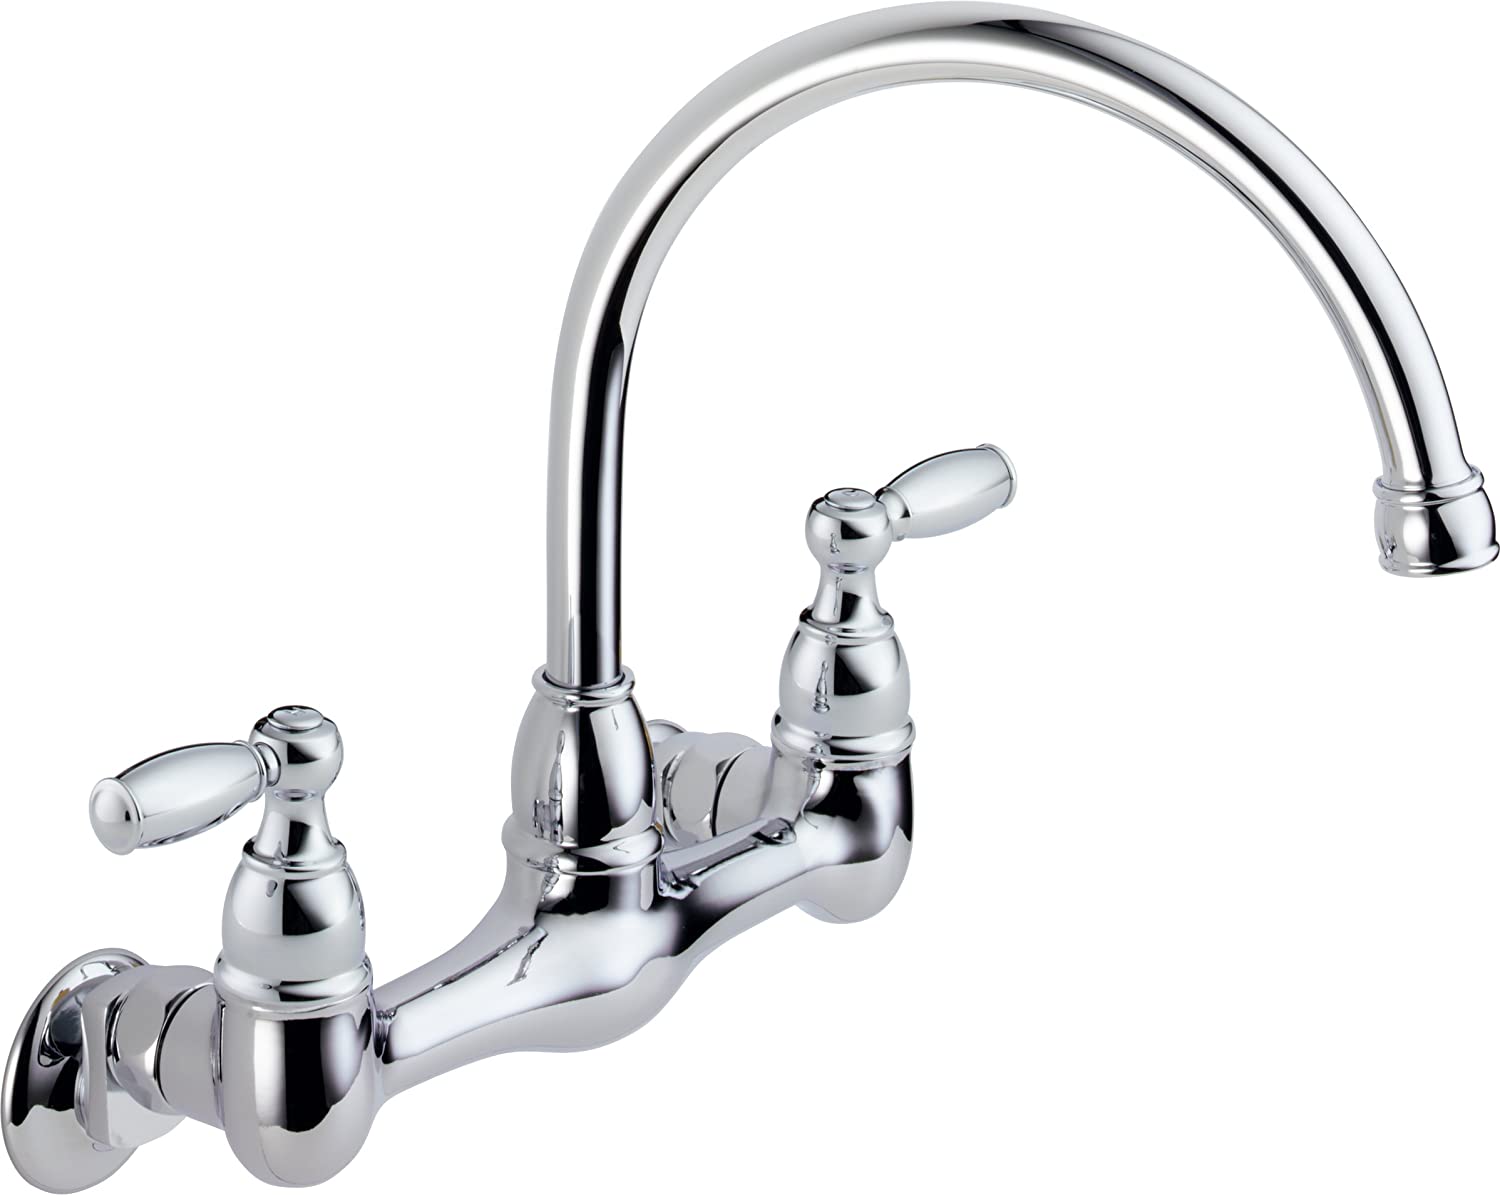 Peerless Two-Handle Wall Mounted Faucet